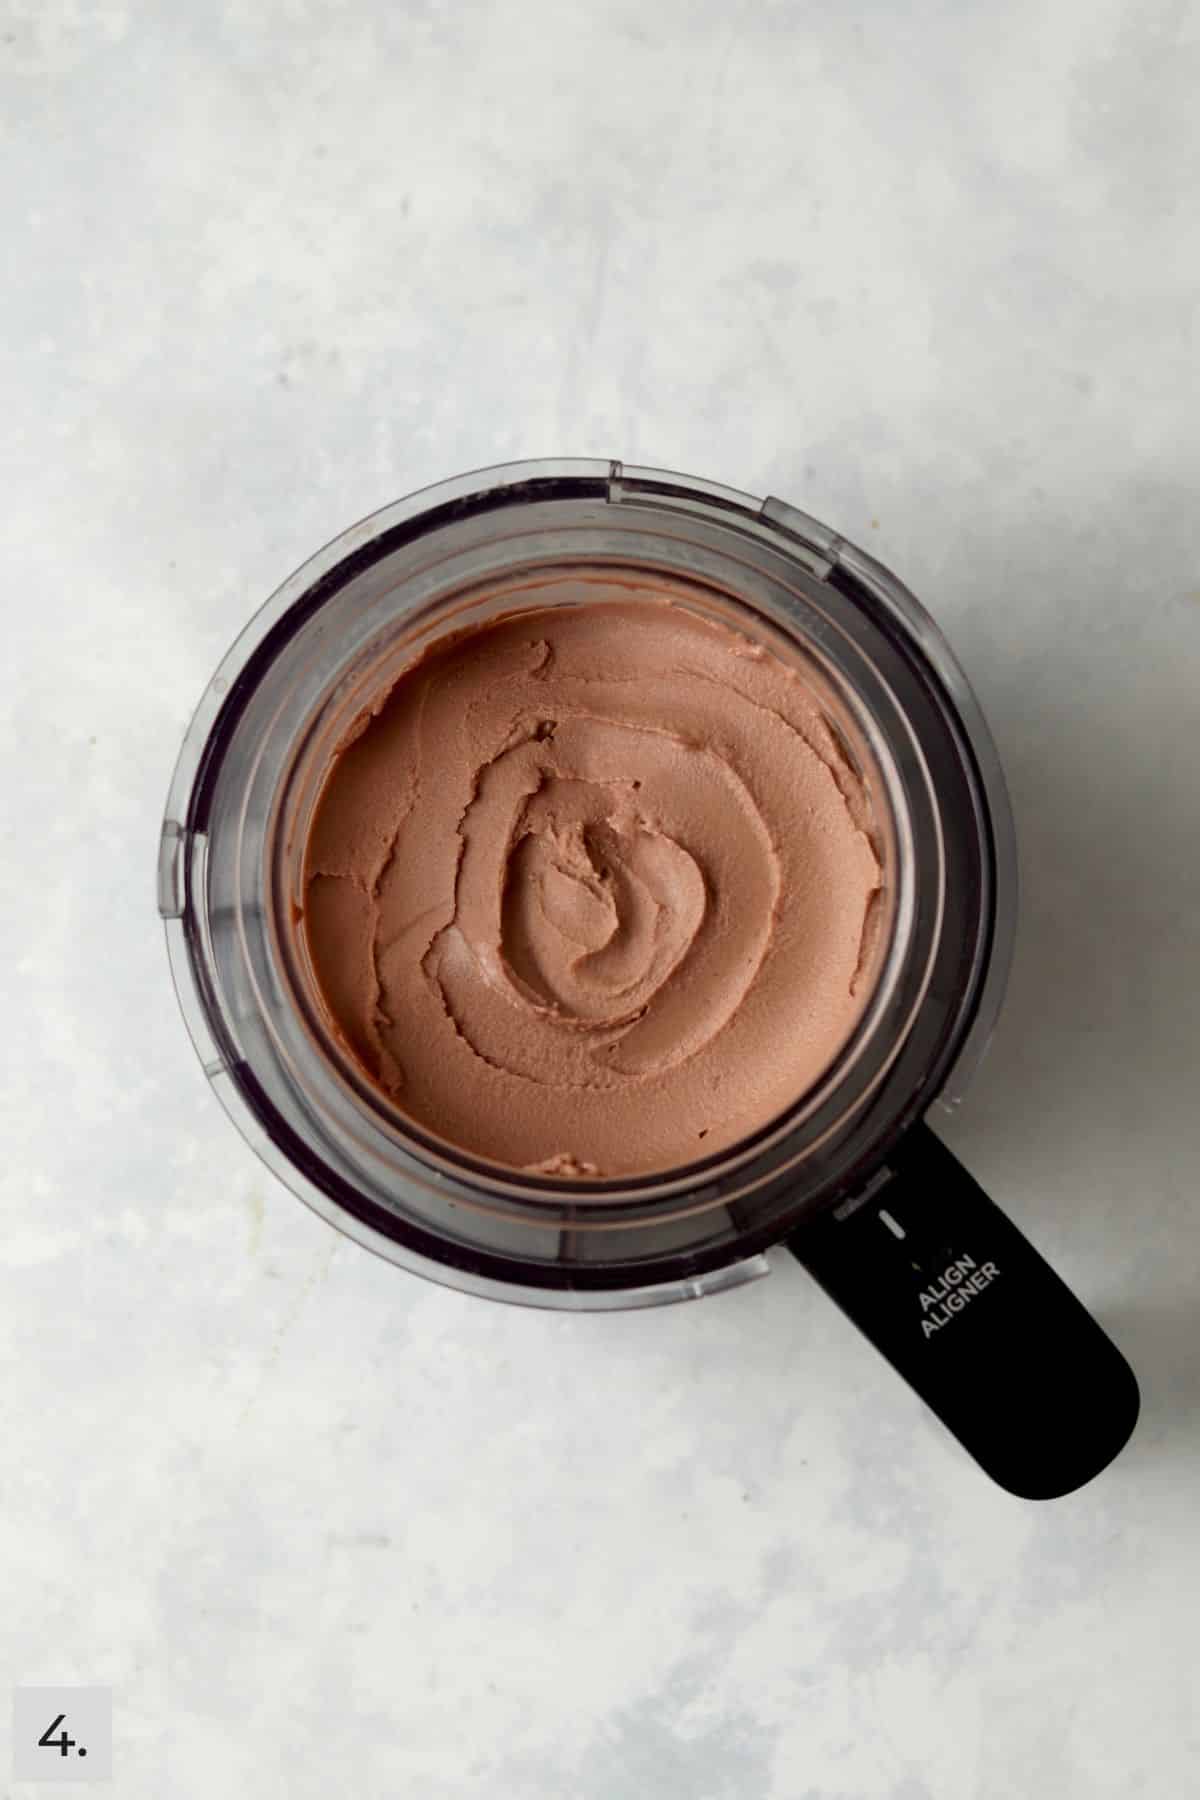 Chocolate soft serve that is creamy on top in Ninja Creamy pint container.